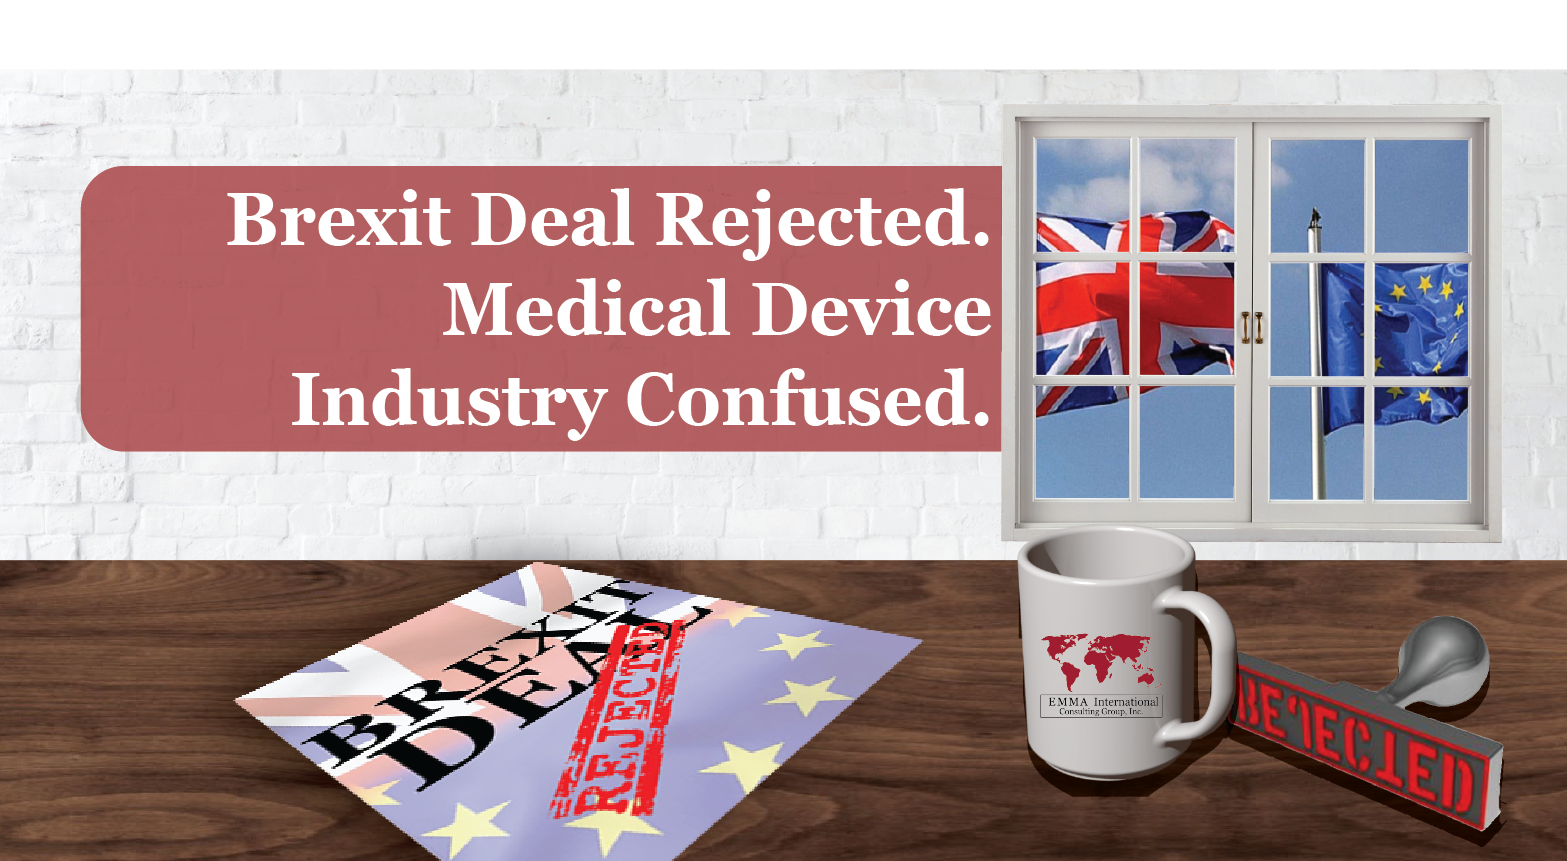 Brexit Deal Rejected. Medical Device Industry Confused.